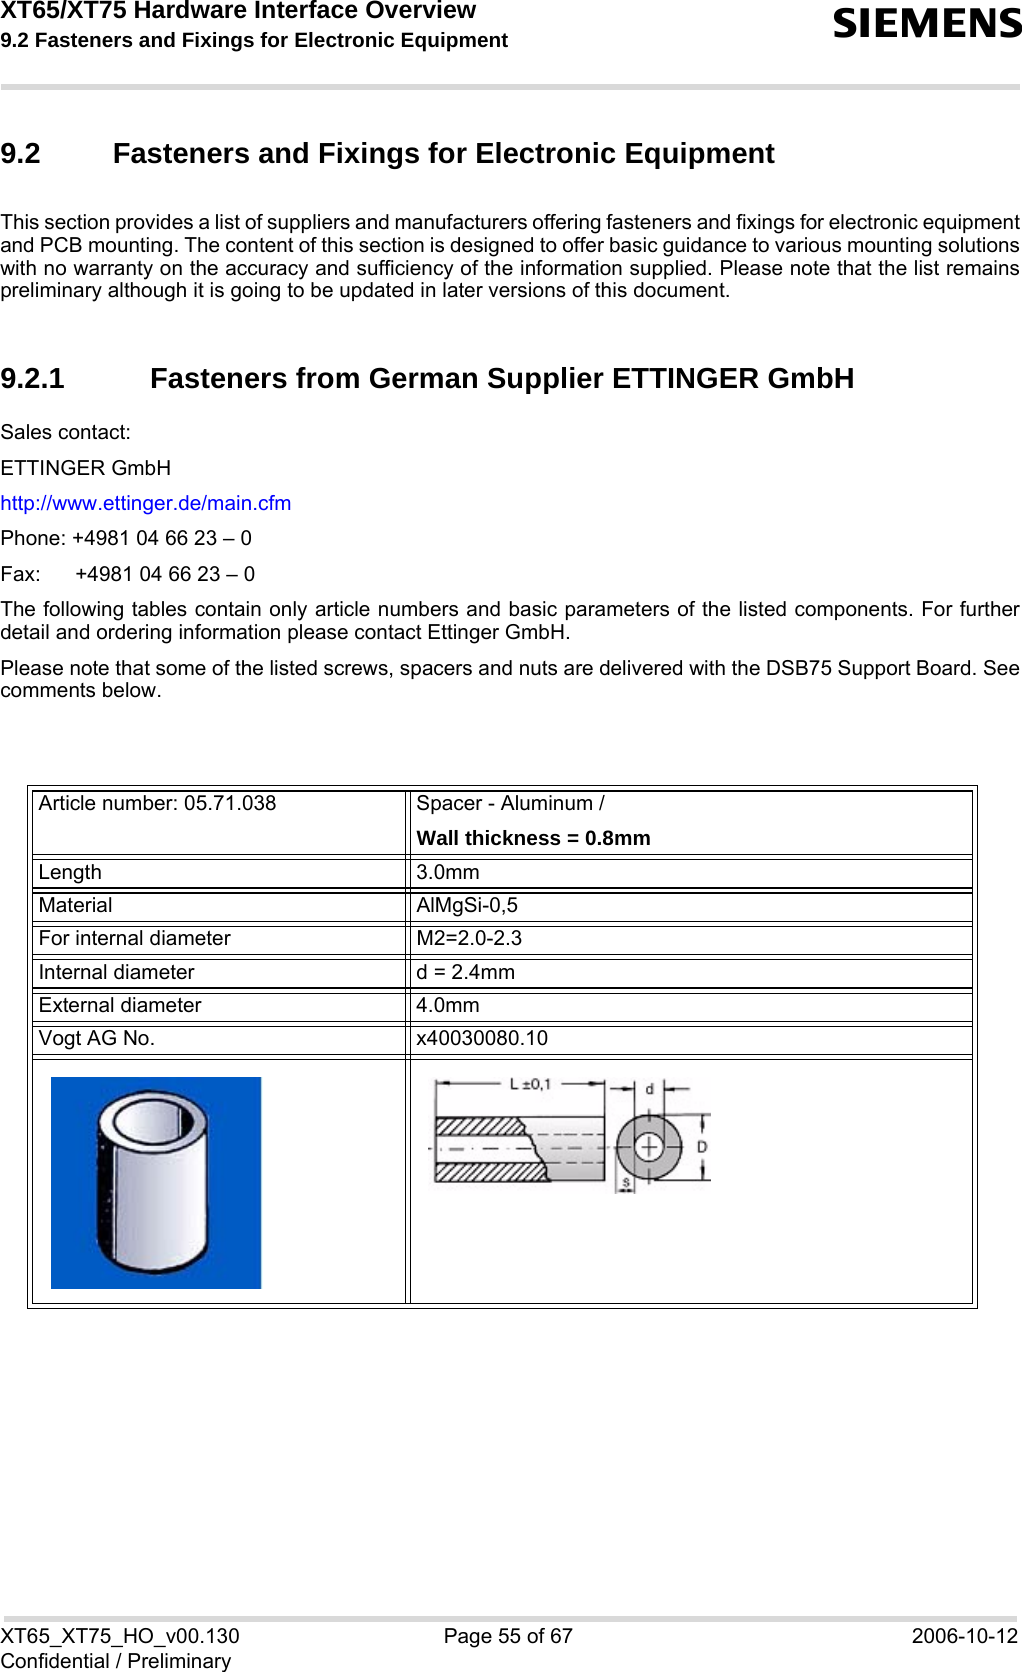 XT65/XT75 Hardware Interface Overview 9.2 Fasteners and Fixings for Electronic Equipment sXT65_XT75_HO_v00.130 Page 55 of 67 2006-10-12Confidential / Preliminary9.2 Fasteners and Fixings for Electronic EquipmentThis section provides a list of suppliers and manufacturers offering fasteners and fixings for electronic equipmentand PCB mounting. The content of this section is designed to offer basic guidance to various mounting solutionswith no warranty on the accuracy and sufficiency of the information supplied. Please note that the list remainspreliminary although it is going to be updated in later versions of this document.9.2.1 Fasteners from German Supplier ETTINGER GmbHSales contact:ETTINGER GmbHhttp://www.ettinger.de/main.cfmPhone: +4981 04 66 23 – 0Fax:  +4981 04 66 23 – 0The following tables contain only article numbers and basic parameters of the listed components. For furtherdetail and ordering information please contact Ettinger GmbH. Please note that some of the listed screws, spacers and nuts are delivered with the DSB75 Support Board. Seecomments below.Article number: 05.71.038 Spacer - Aluminum /Wall thickness = 0.8mmLength 3.0mmMaterial AlMgSi-0,5For internal diameter M2=2.0-2.3 Internal diameter d = 2.4mmExternal diameter 4.0mmVogt AG No. x40030080.10